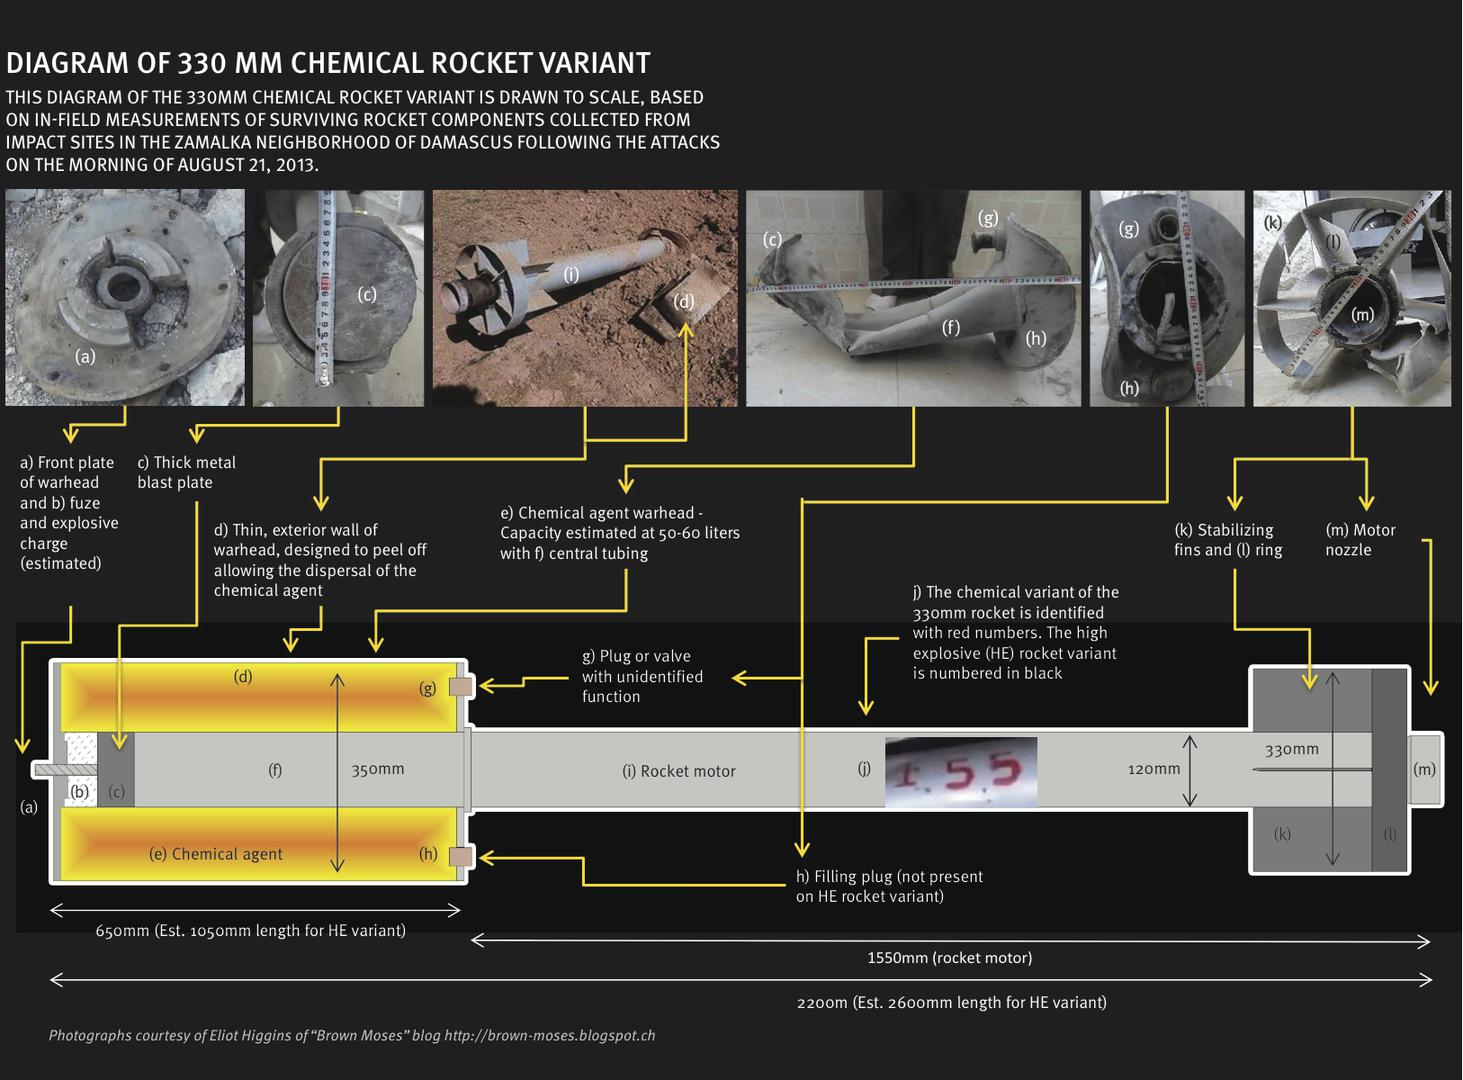 Syria: Government Likely Culprit in Chemical Attack | Human Rights Watch